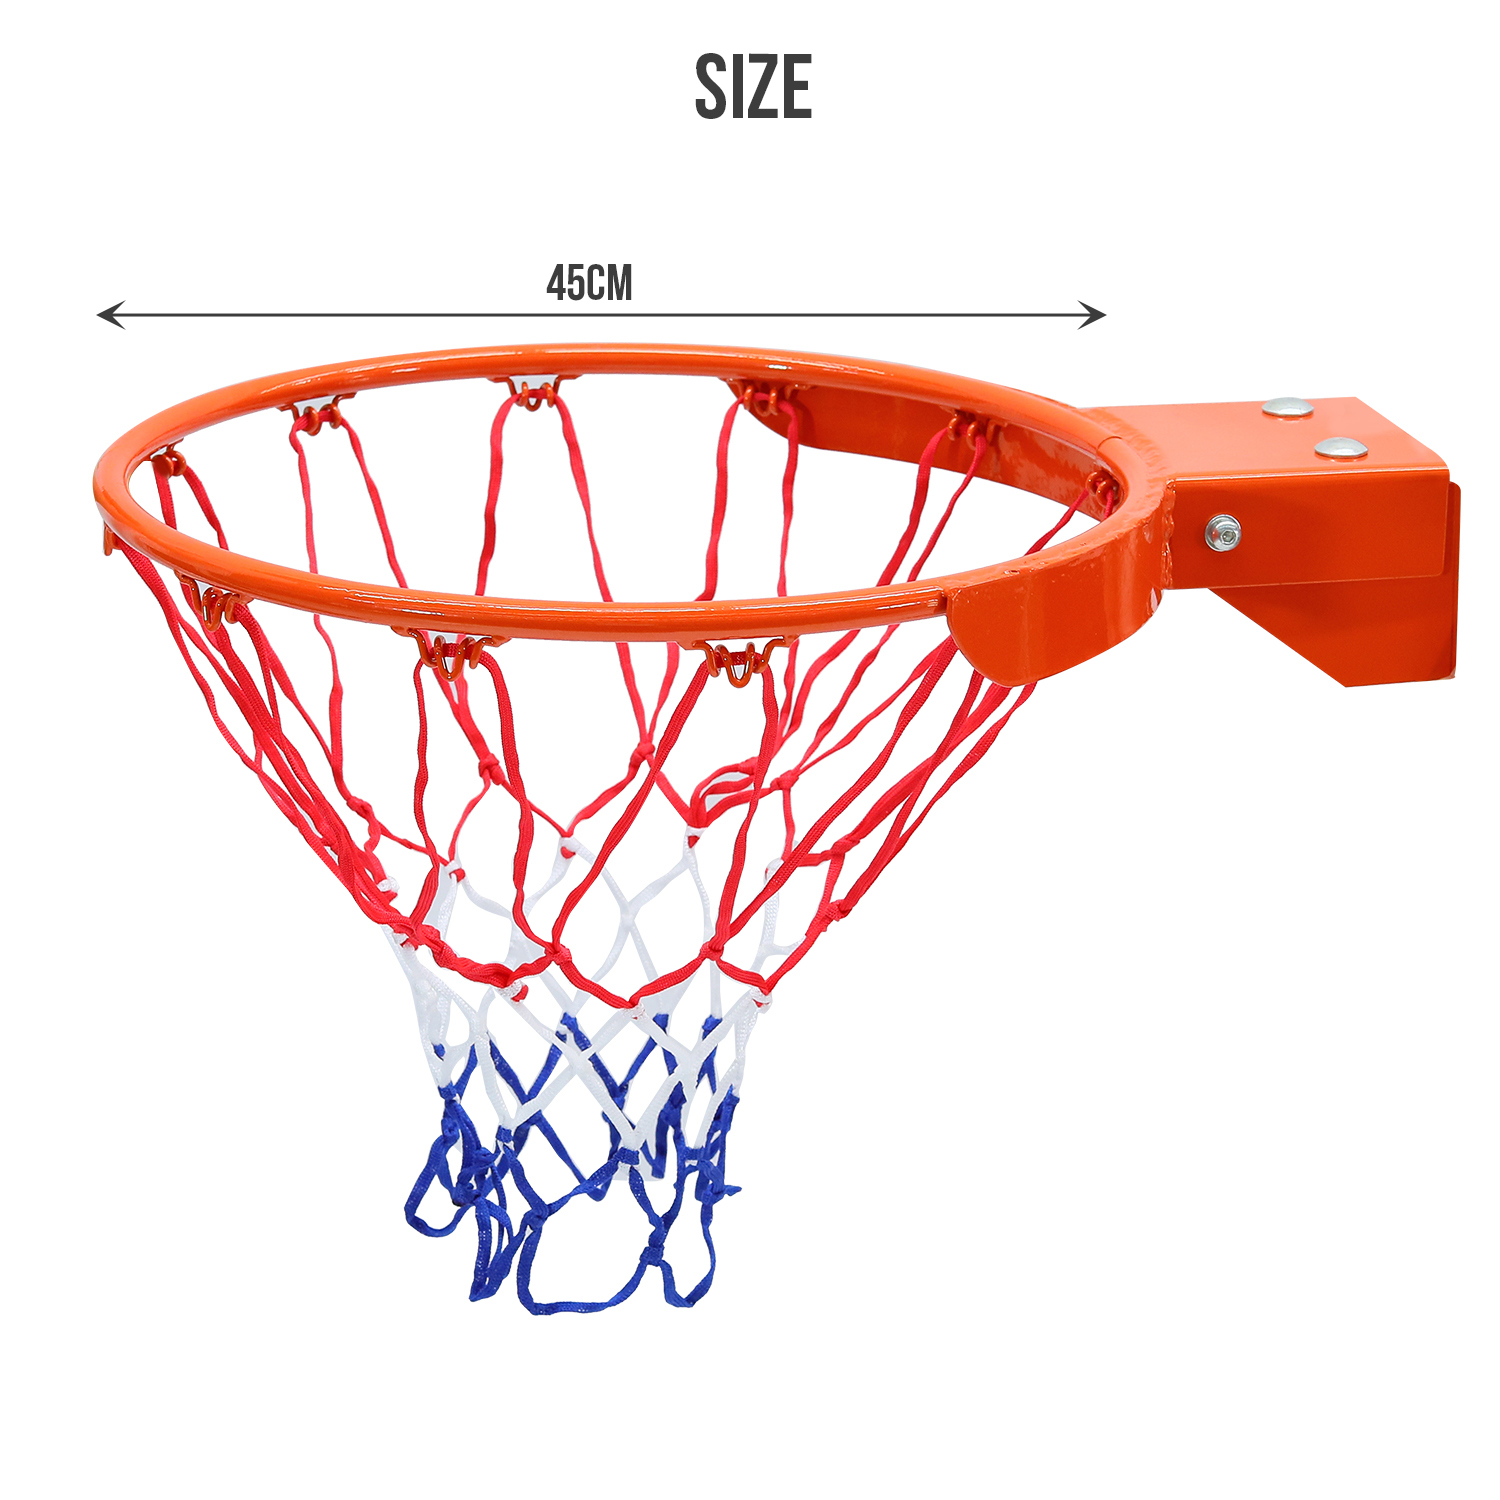 High School-College Basketball Court Dimensions Diagram | Court & Field  Dimension Diagrams in 3D, History, Rules – SportsKnowHow.com